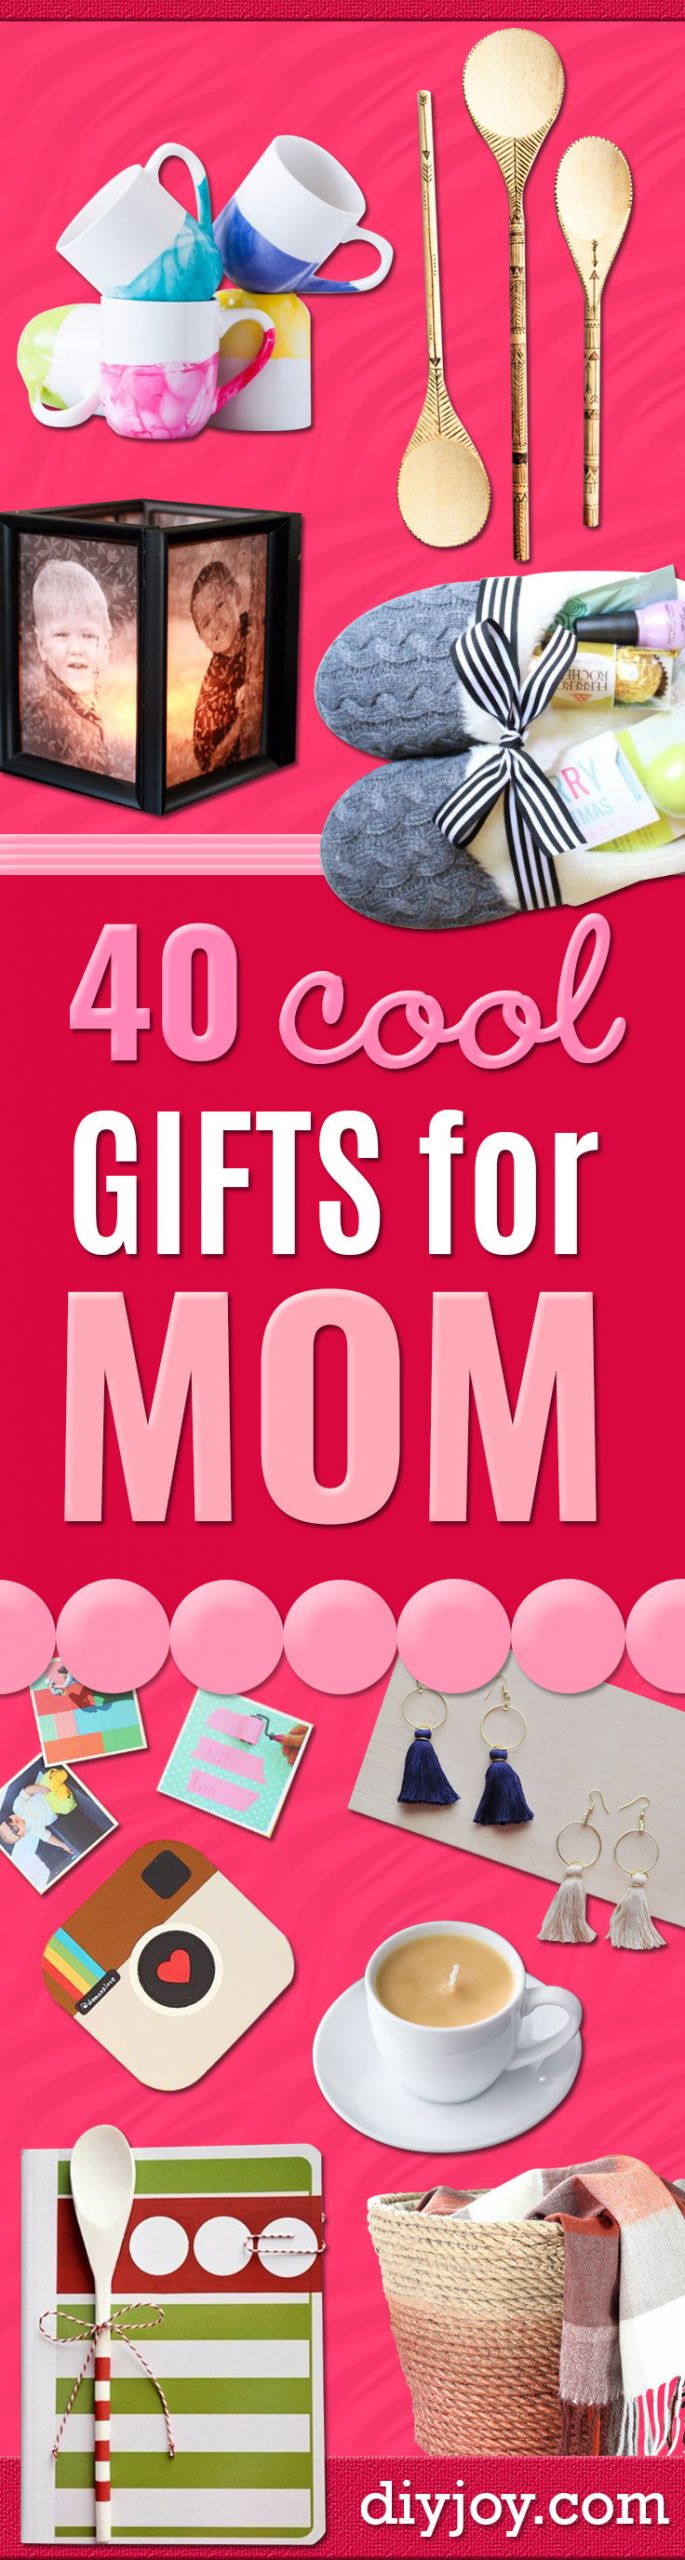 Great Gift Ideas For Mothers
 40 Coolest Gifts To Make for Mom